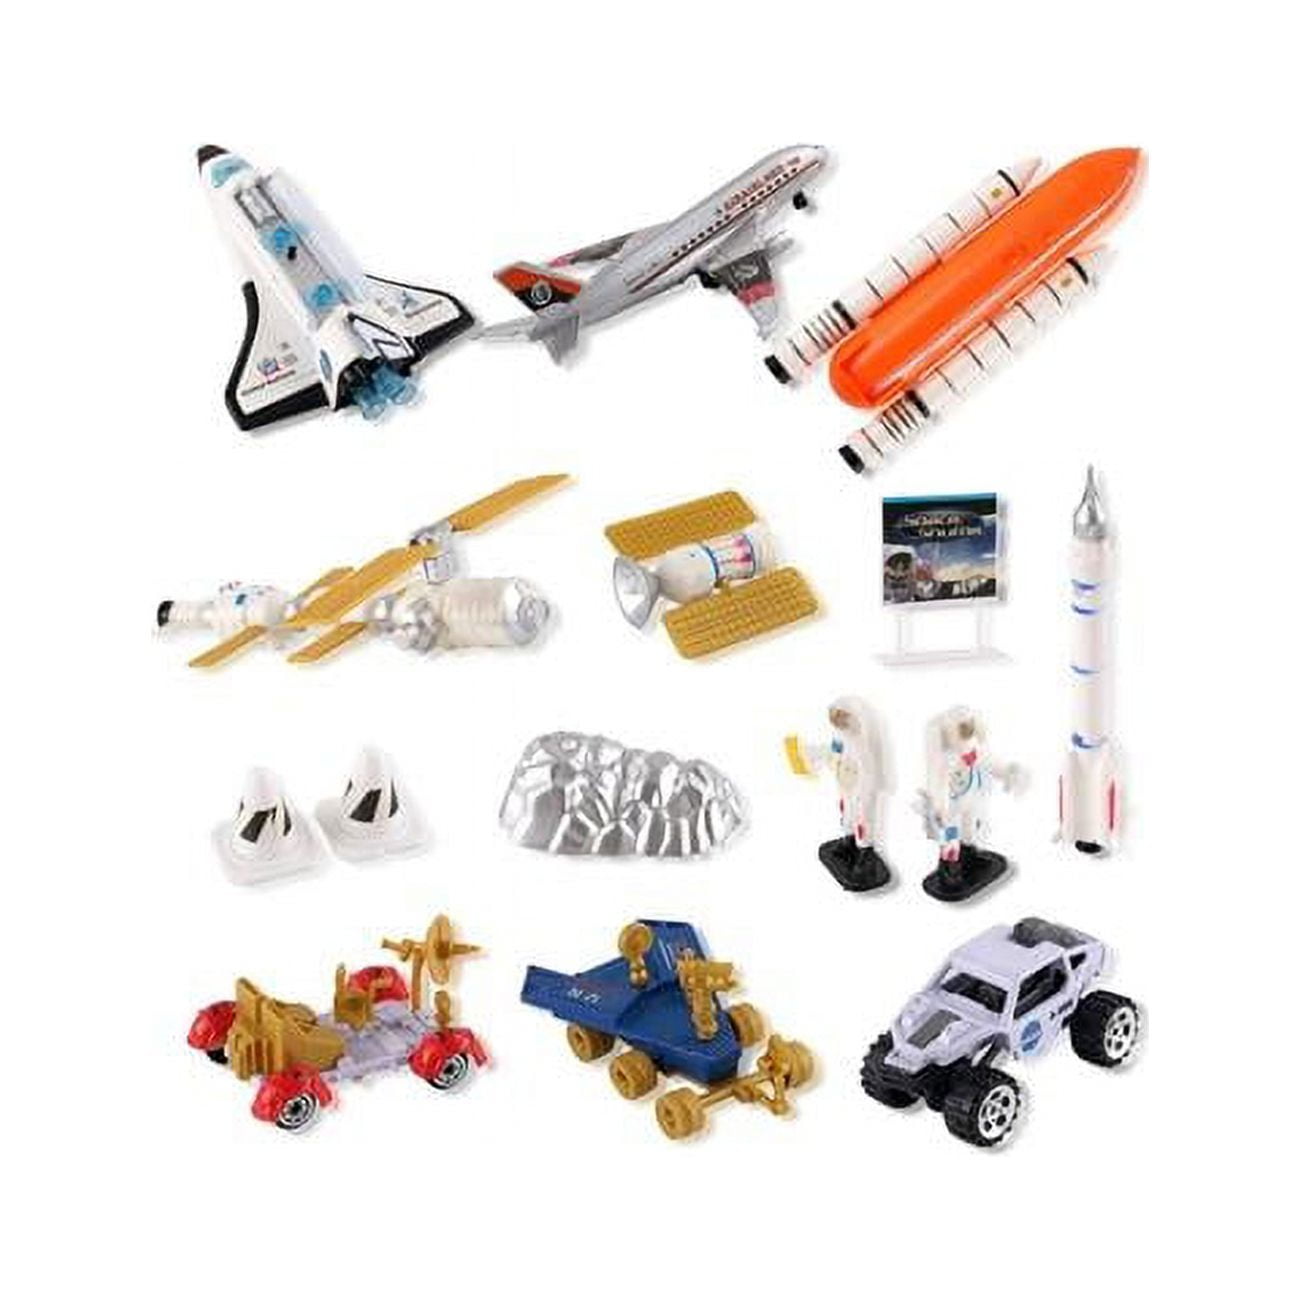 Mars Space Shuttle Playset For Kids With Rockets Satellites Rovers & Vehicles - 15 Piece